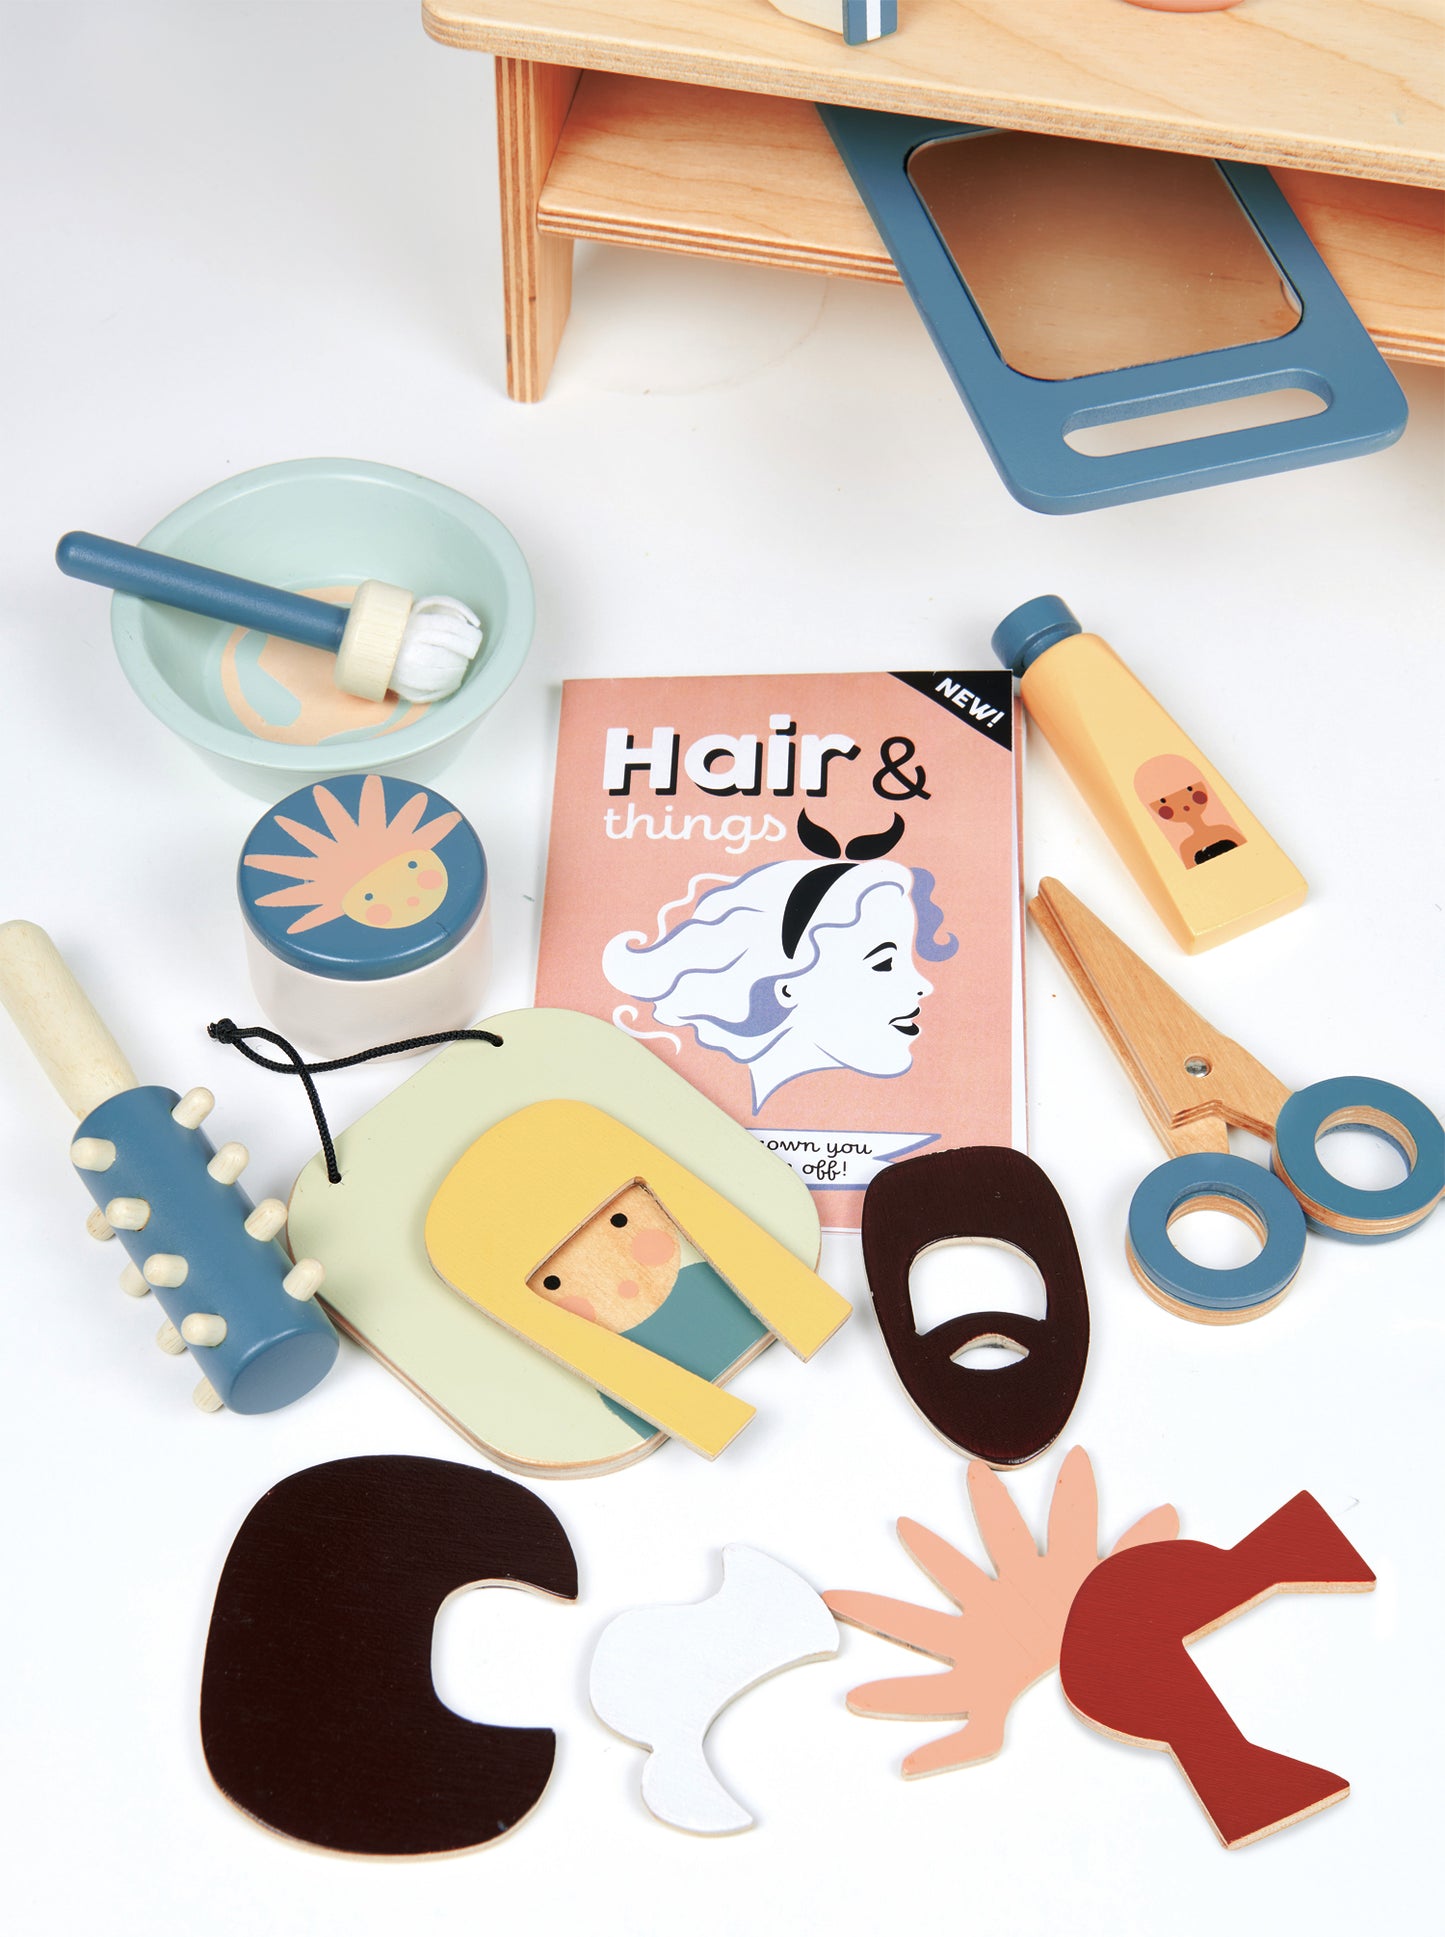 Wooden pretend play hair salon accessories including brushes, shampoo, scissors, magazine and magnetic face with different hair styles.